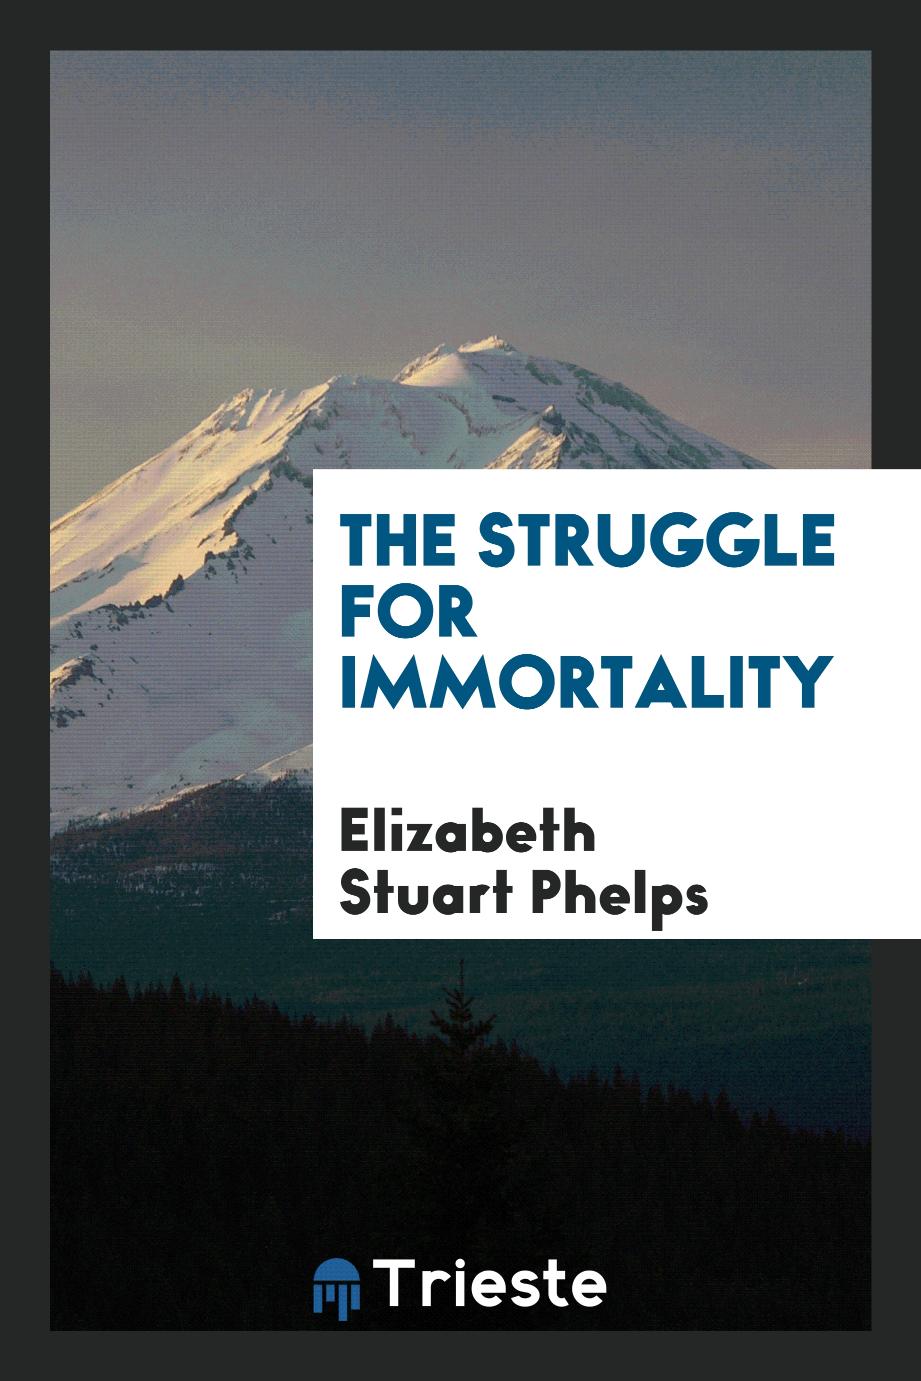 The struggle for immortality